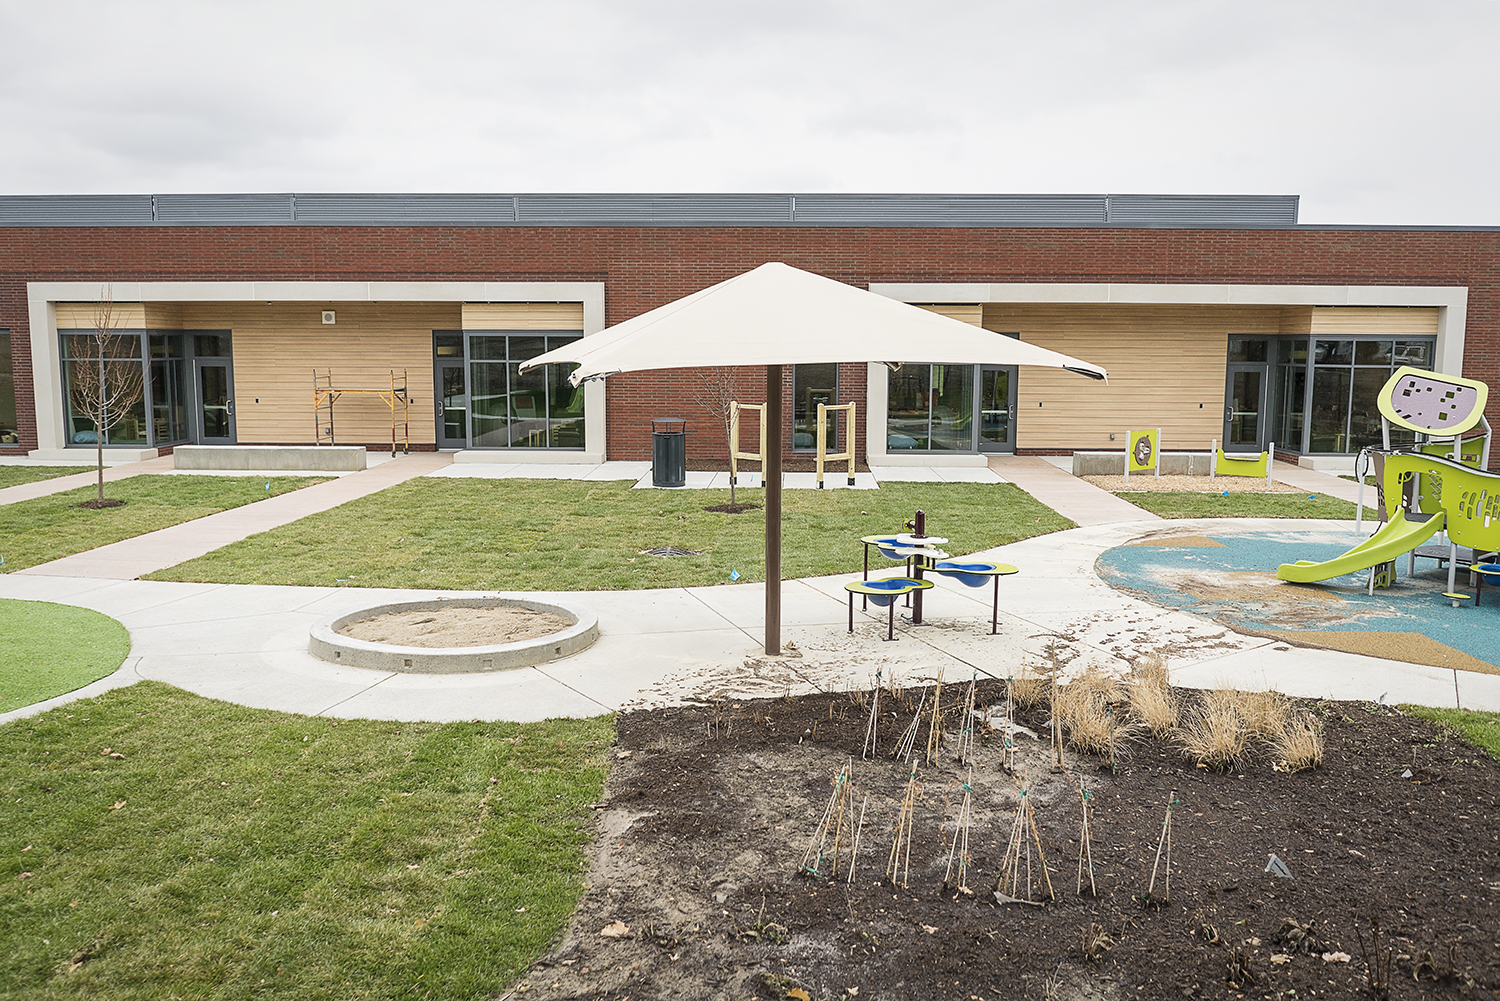 Flint, MI - Tuesday, November 21, 2017: New landscaping, activity centers and playscapes are being installed outside of the classrooms at the new Educare Center in Flint.